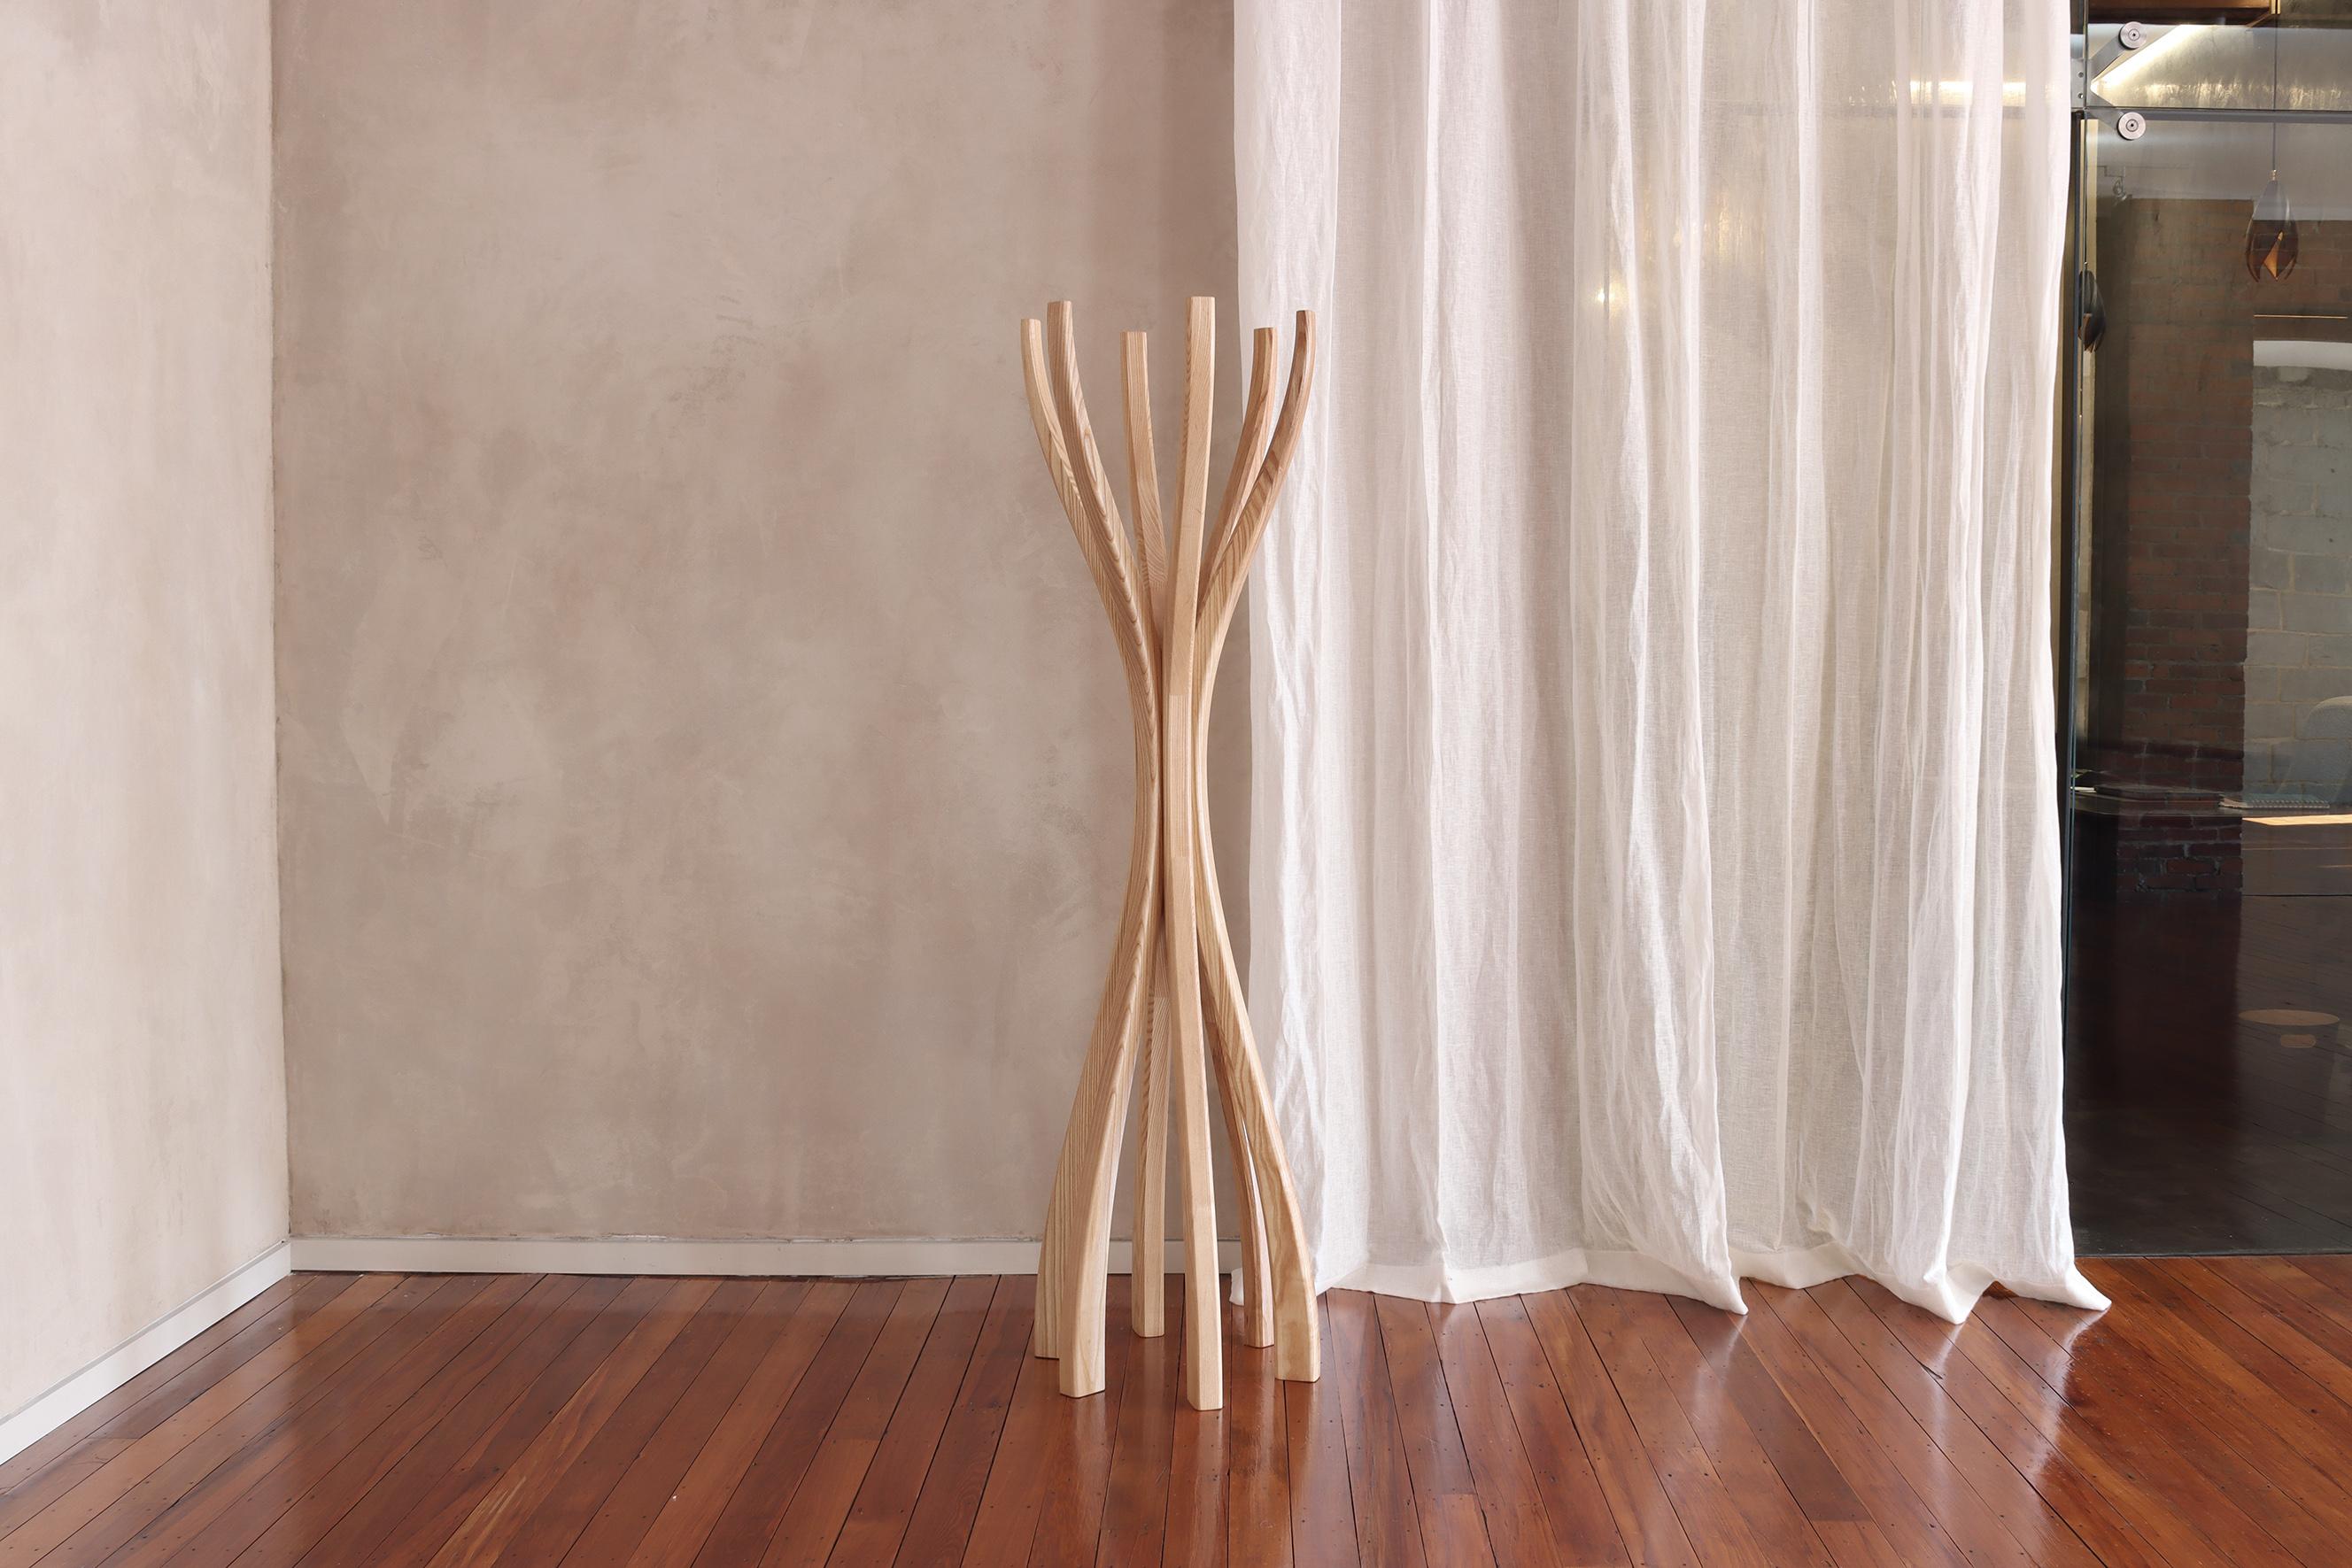 The Frame Coat Rack is a beautifully crafted piece, designed and crafted with precision in New Zealand.

The design of the Frame Coat rack is characterized by its soft curves that flow seamlessly, creating a structure that is both supportive and